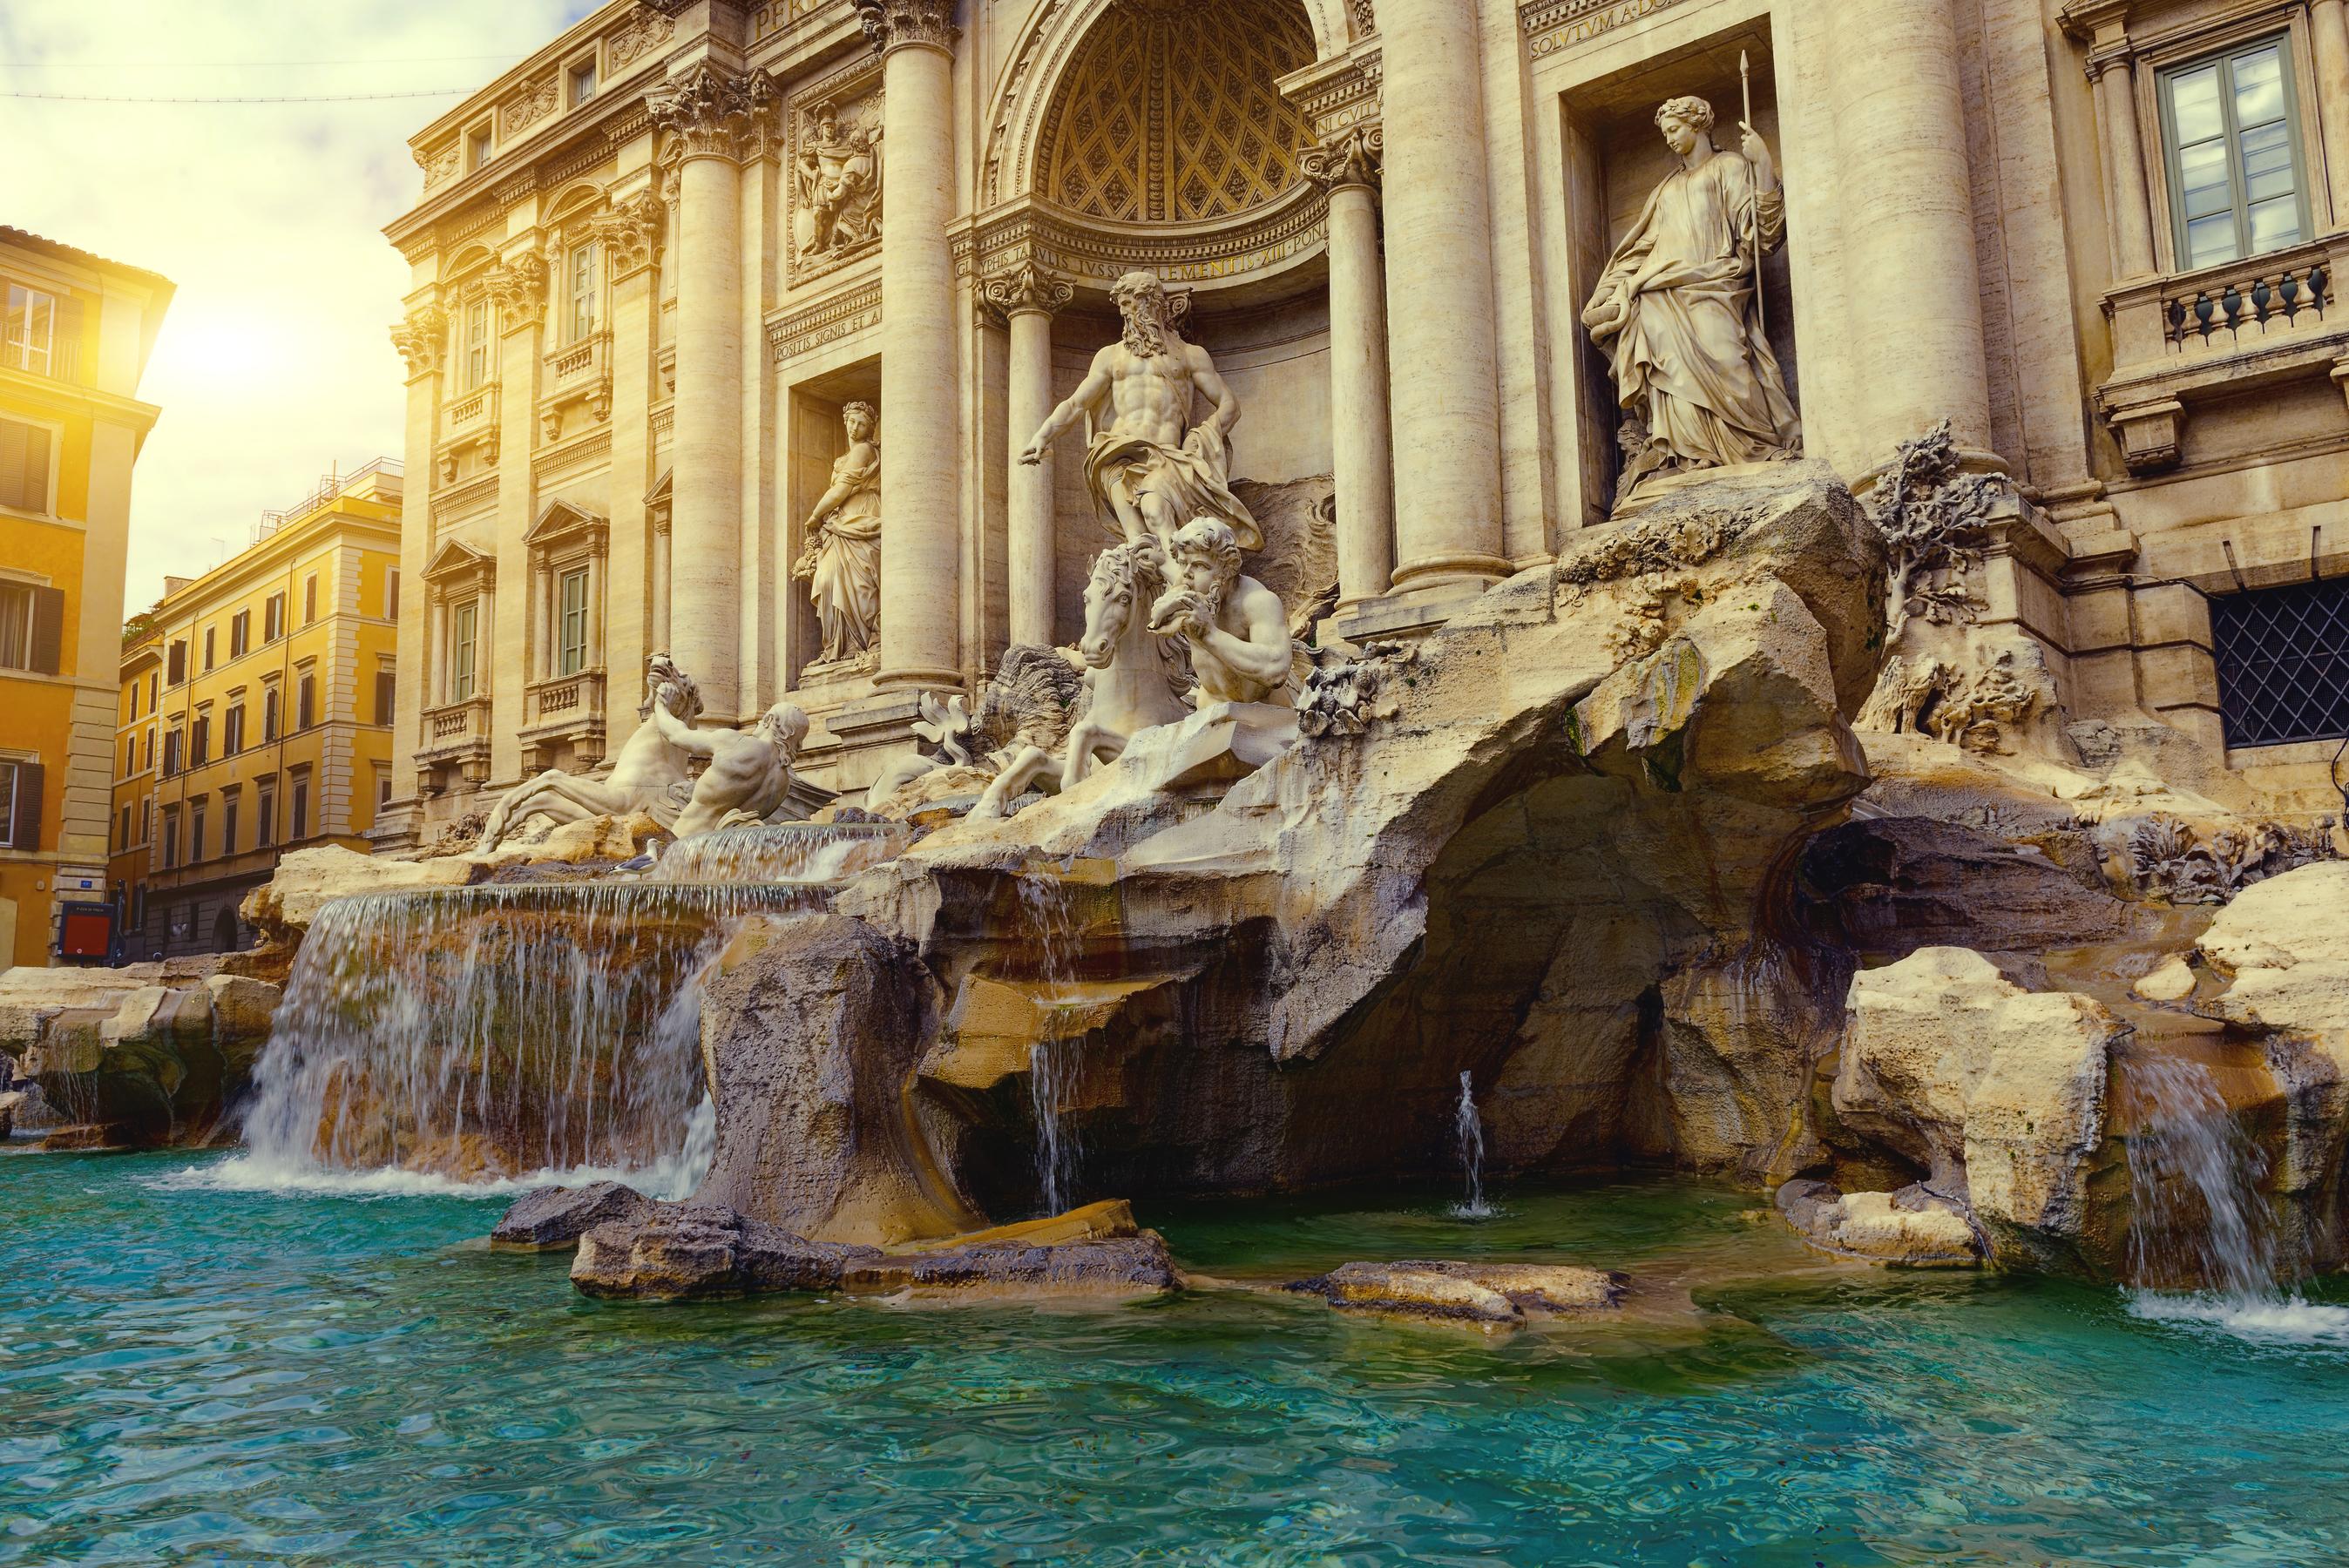 Travel Secrets Unveiled: Where Does the Money Tossed in the Trevi Fountain Go?